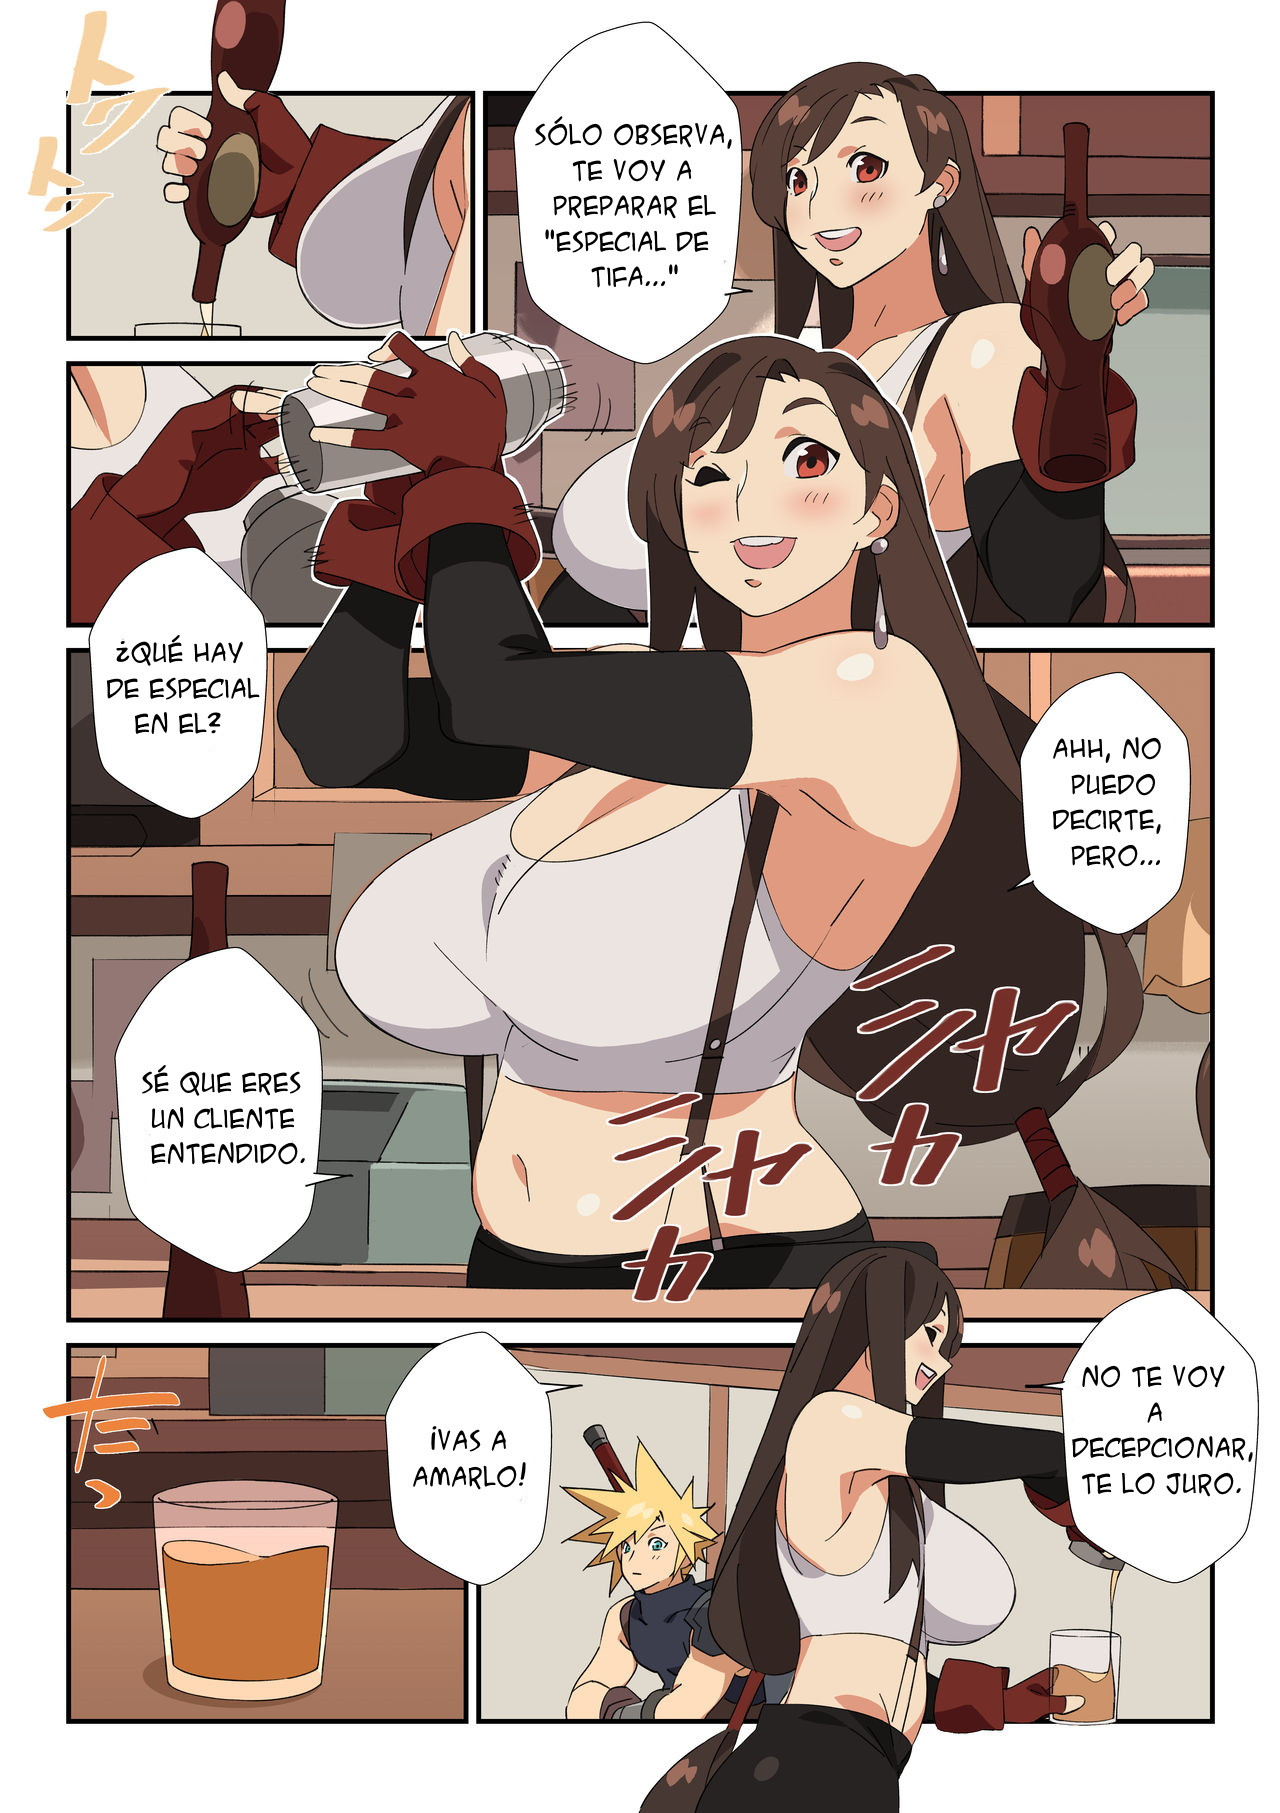 [Nisego] Tifa’s special Cocktail! - 5